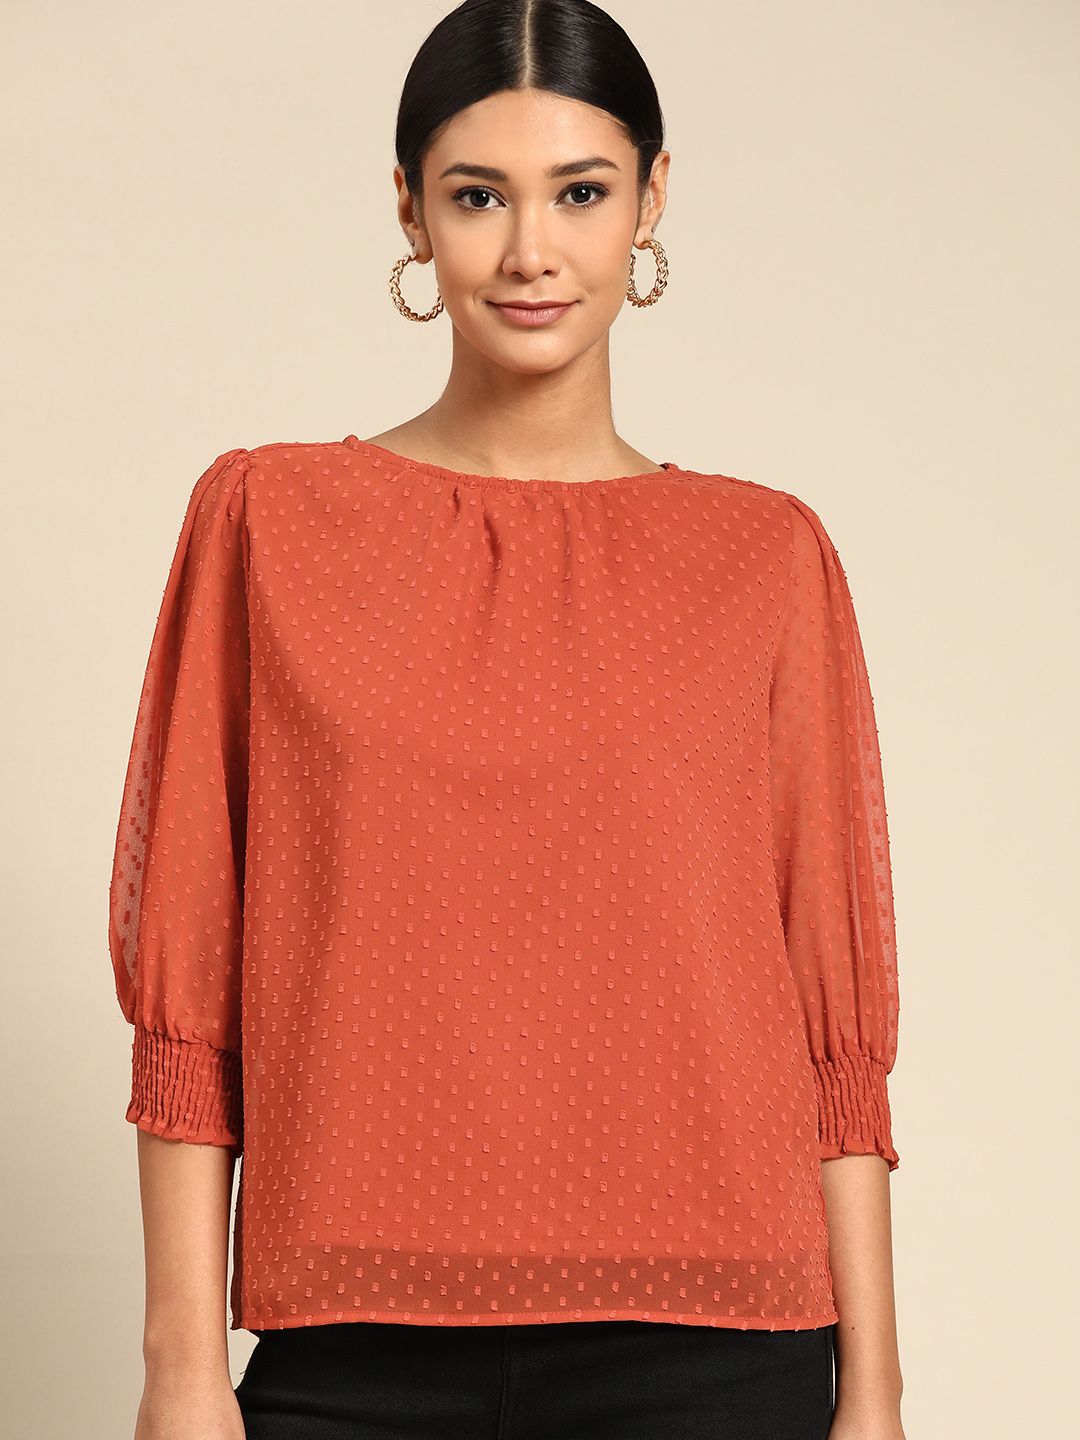 all about you Women Rust Orange Dobby Weave Top Price in India